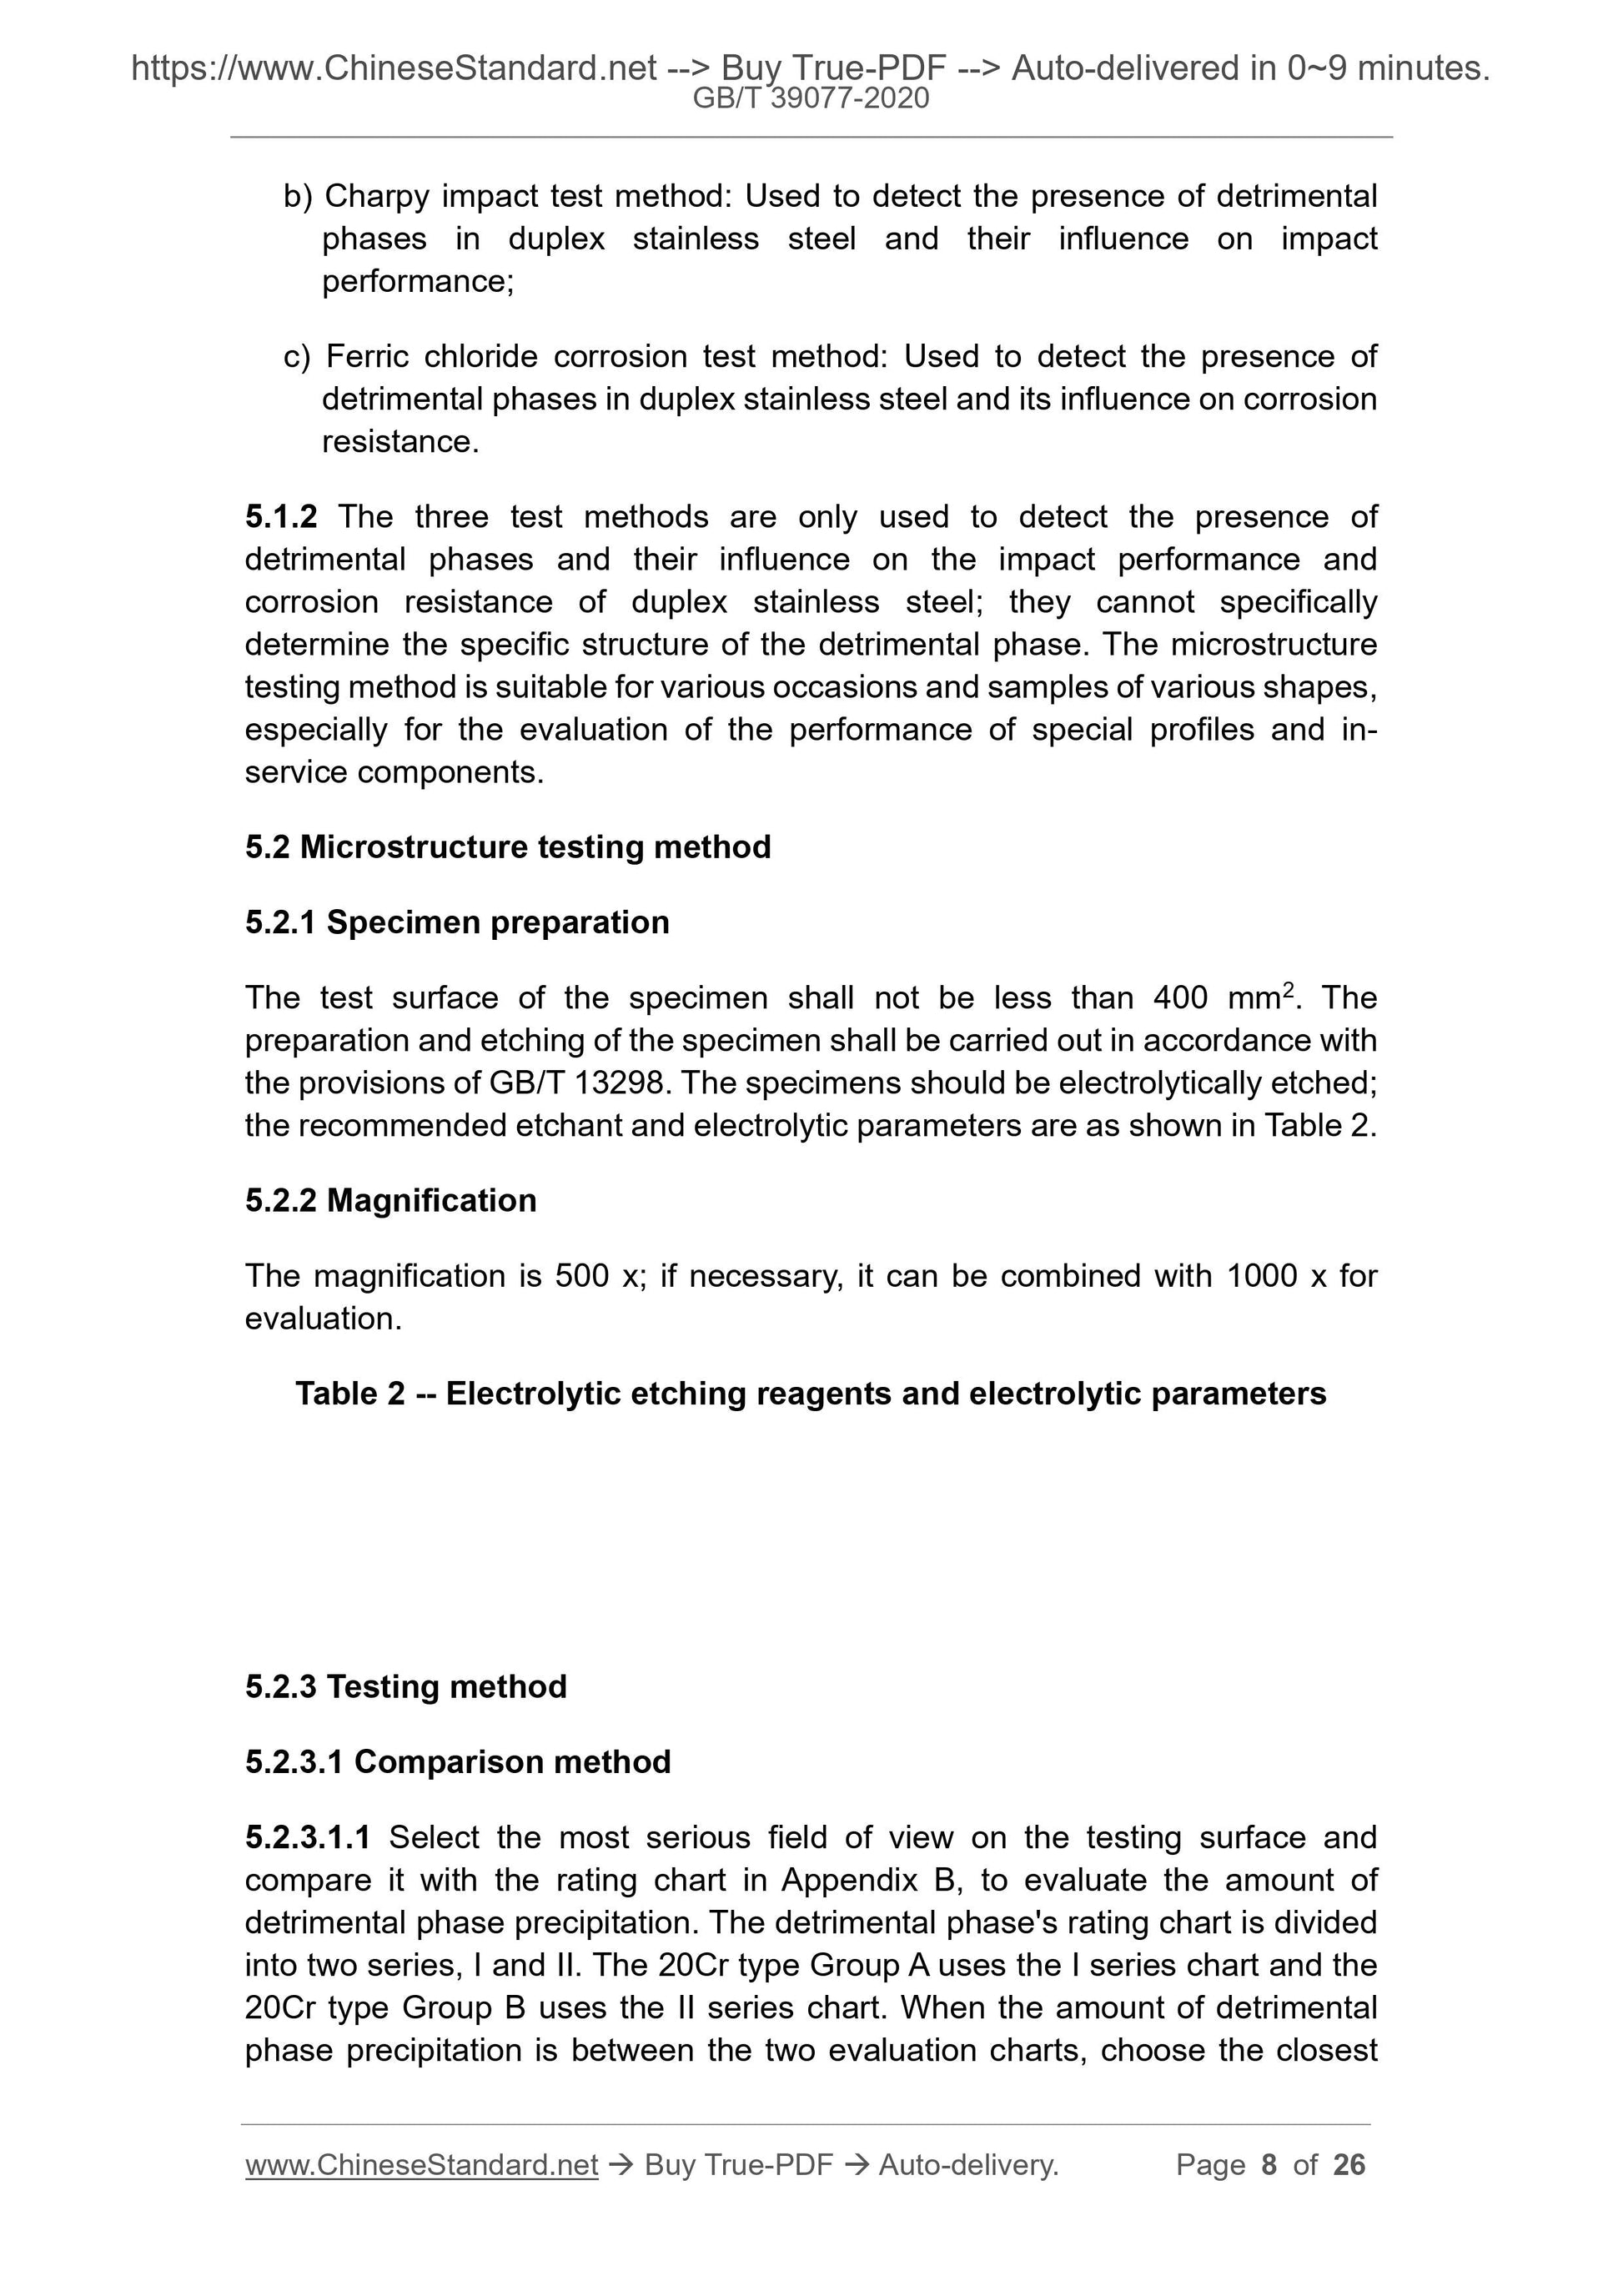 GB/T 39077-2020 Page 5